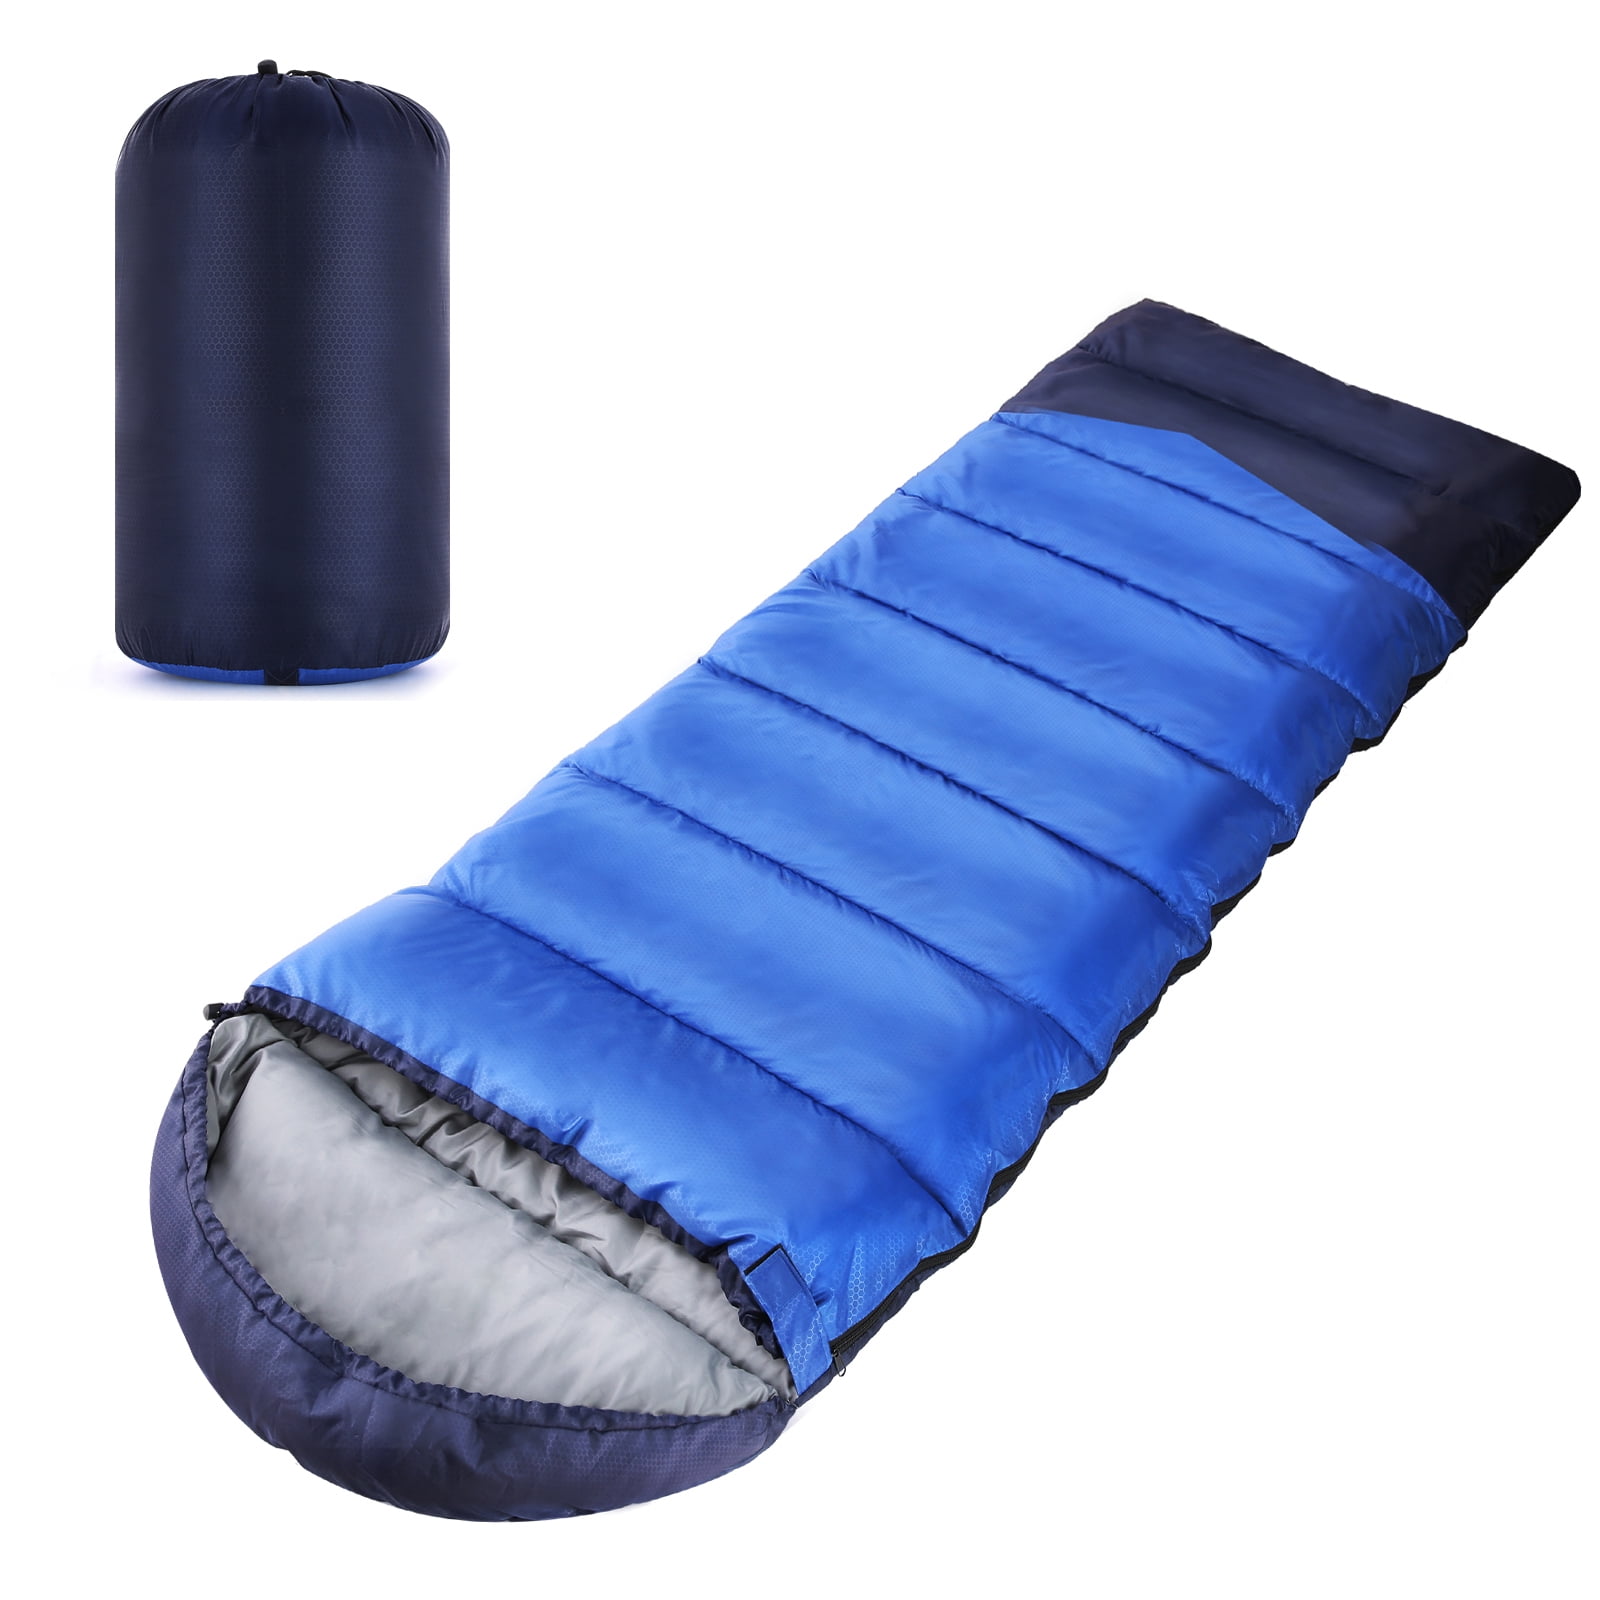 Soulout Envelope Sleeping Bag - 4 Seasons Warm Cold Weather Lightweight, Portable, Waterproof with Compression Sack for Adults & Kids - Indoor &am